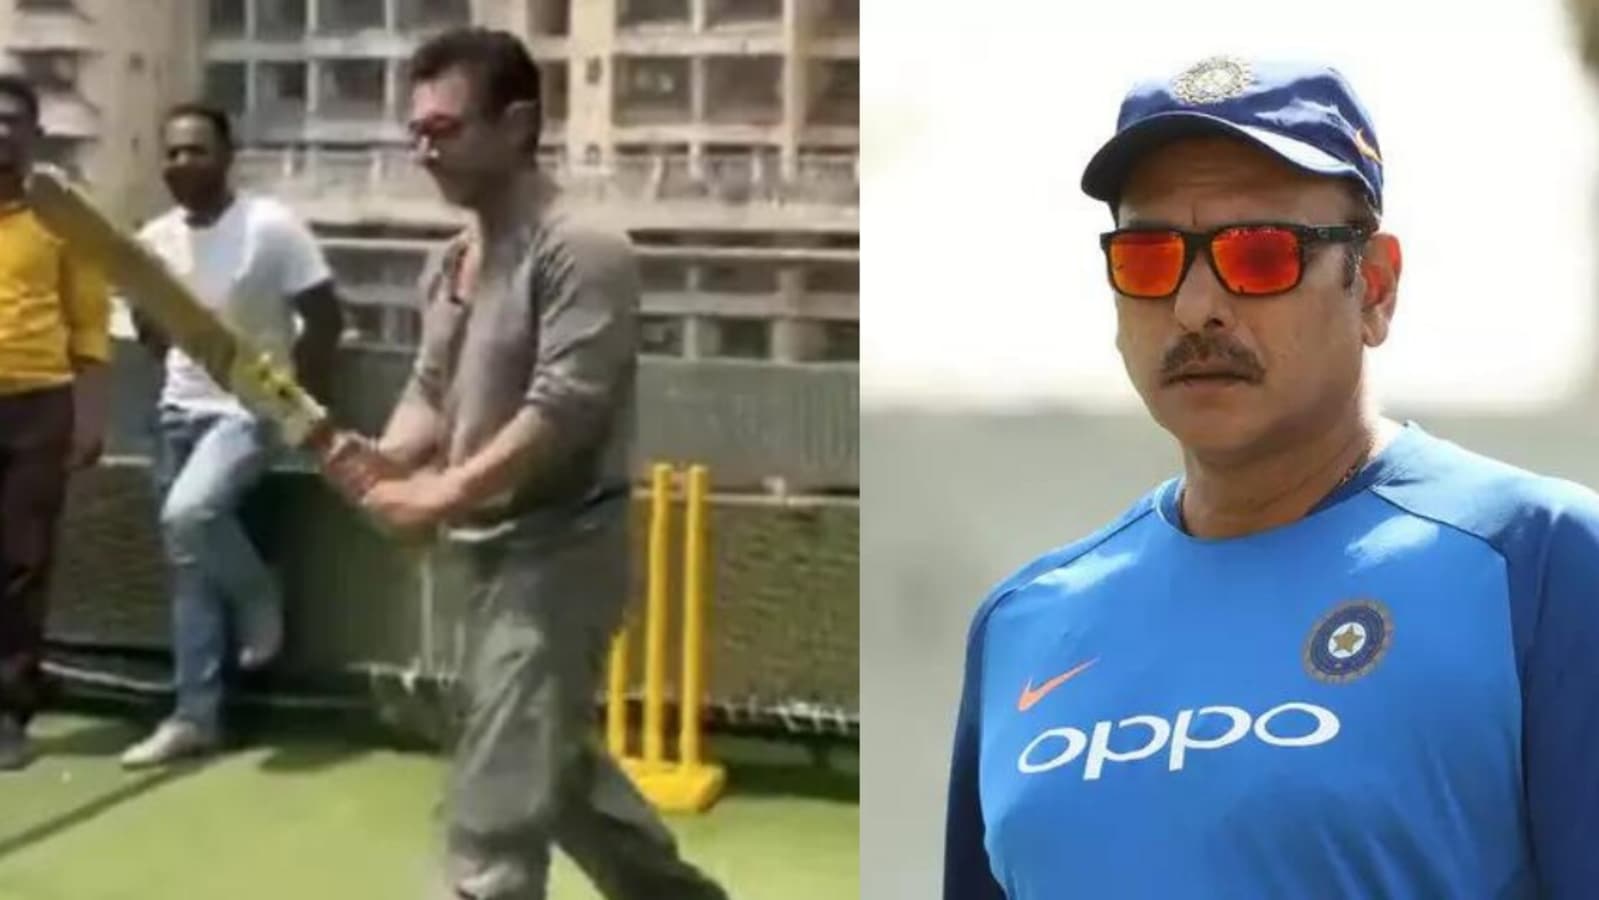 Aamir Khan gets Ravi Shastri’s approval for IPL gig on video of actor playing cricket: ‘Should get into most teams’